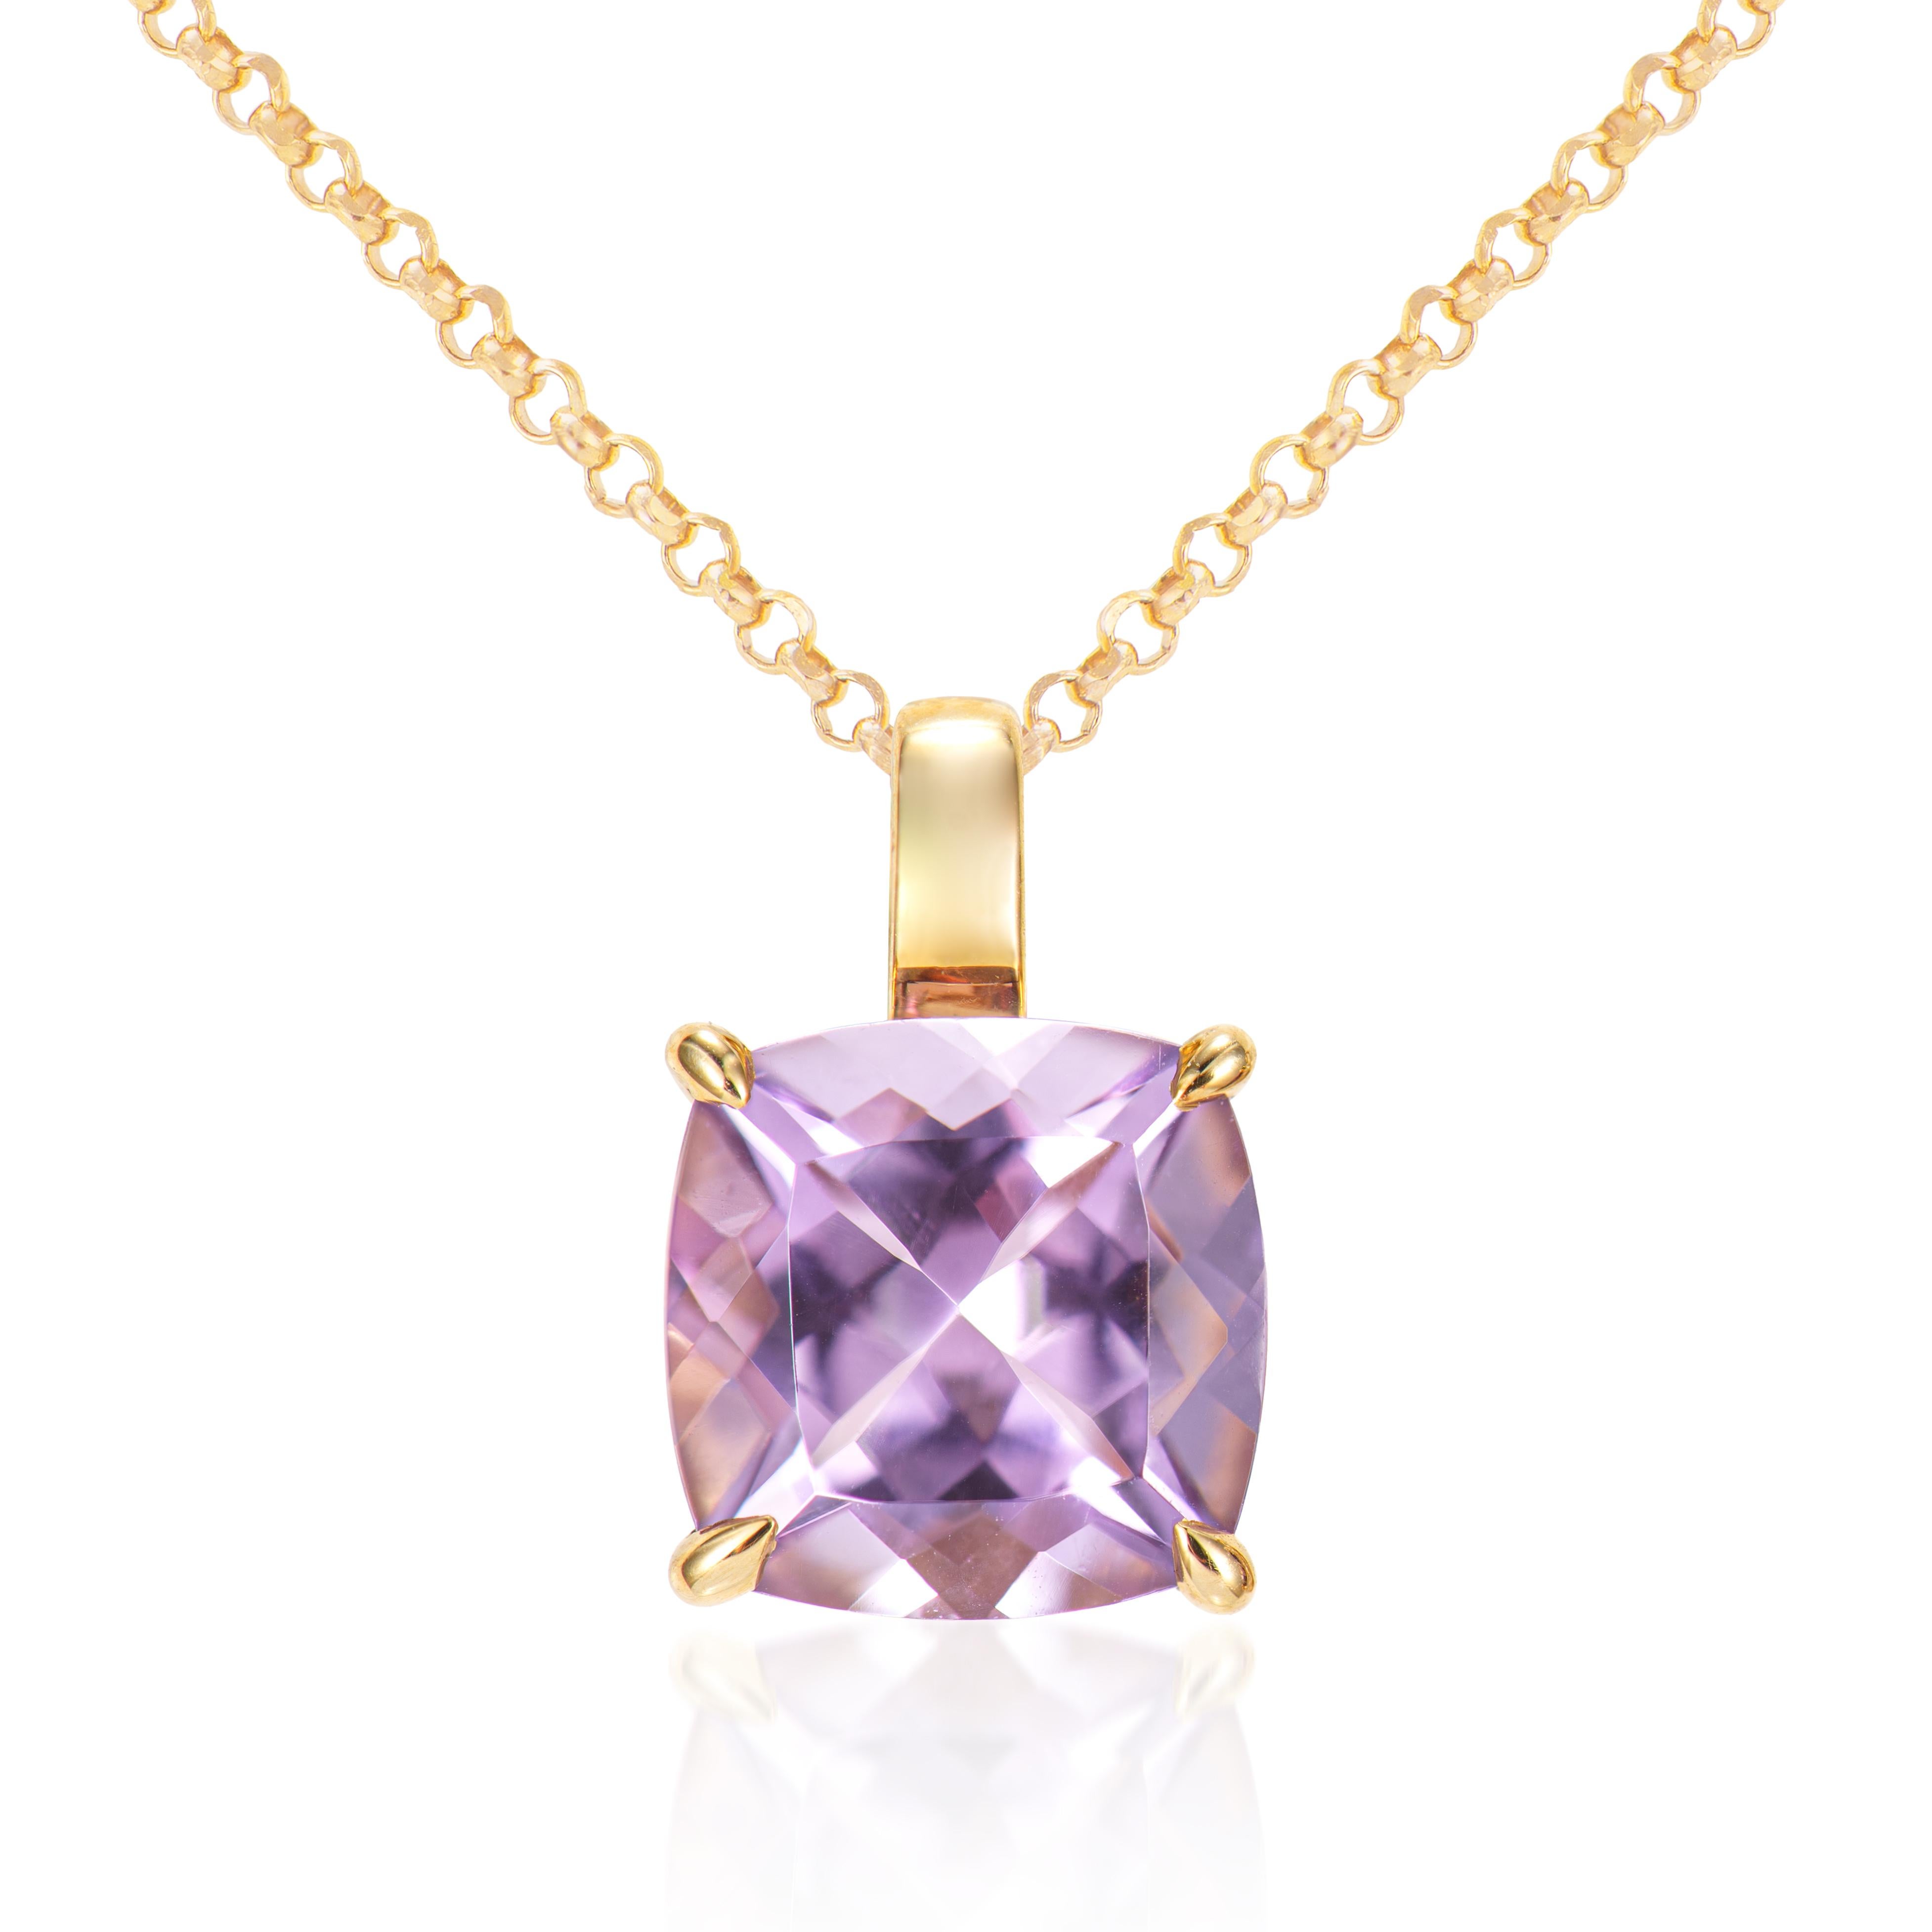 Contemporary 2.12 Carat Amethyst Pendant in 18Karat Yellow Gold.  For Sale